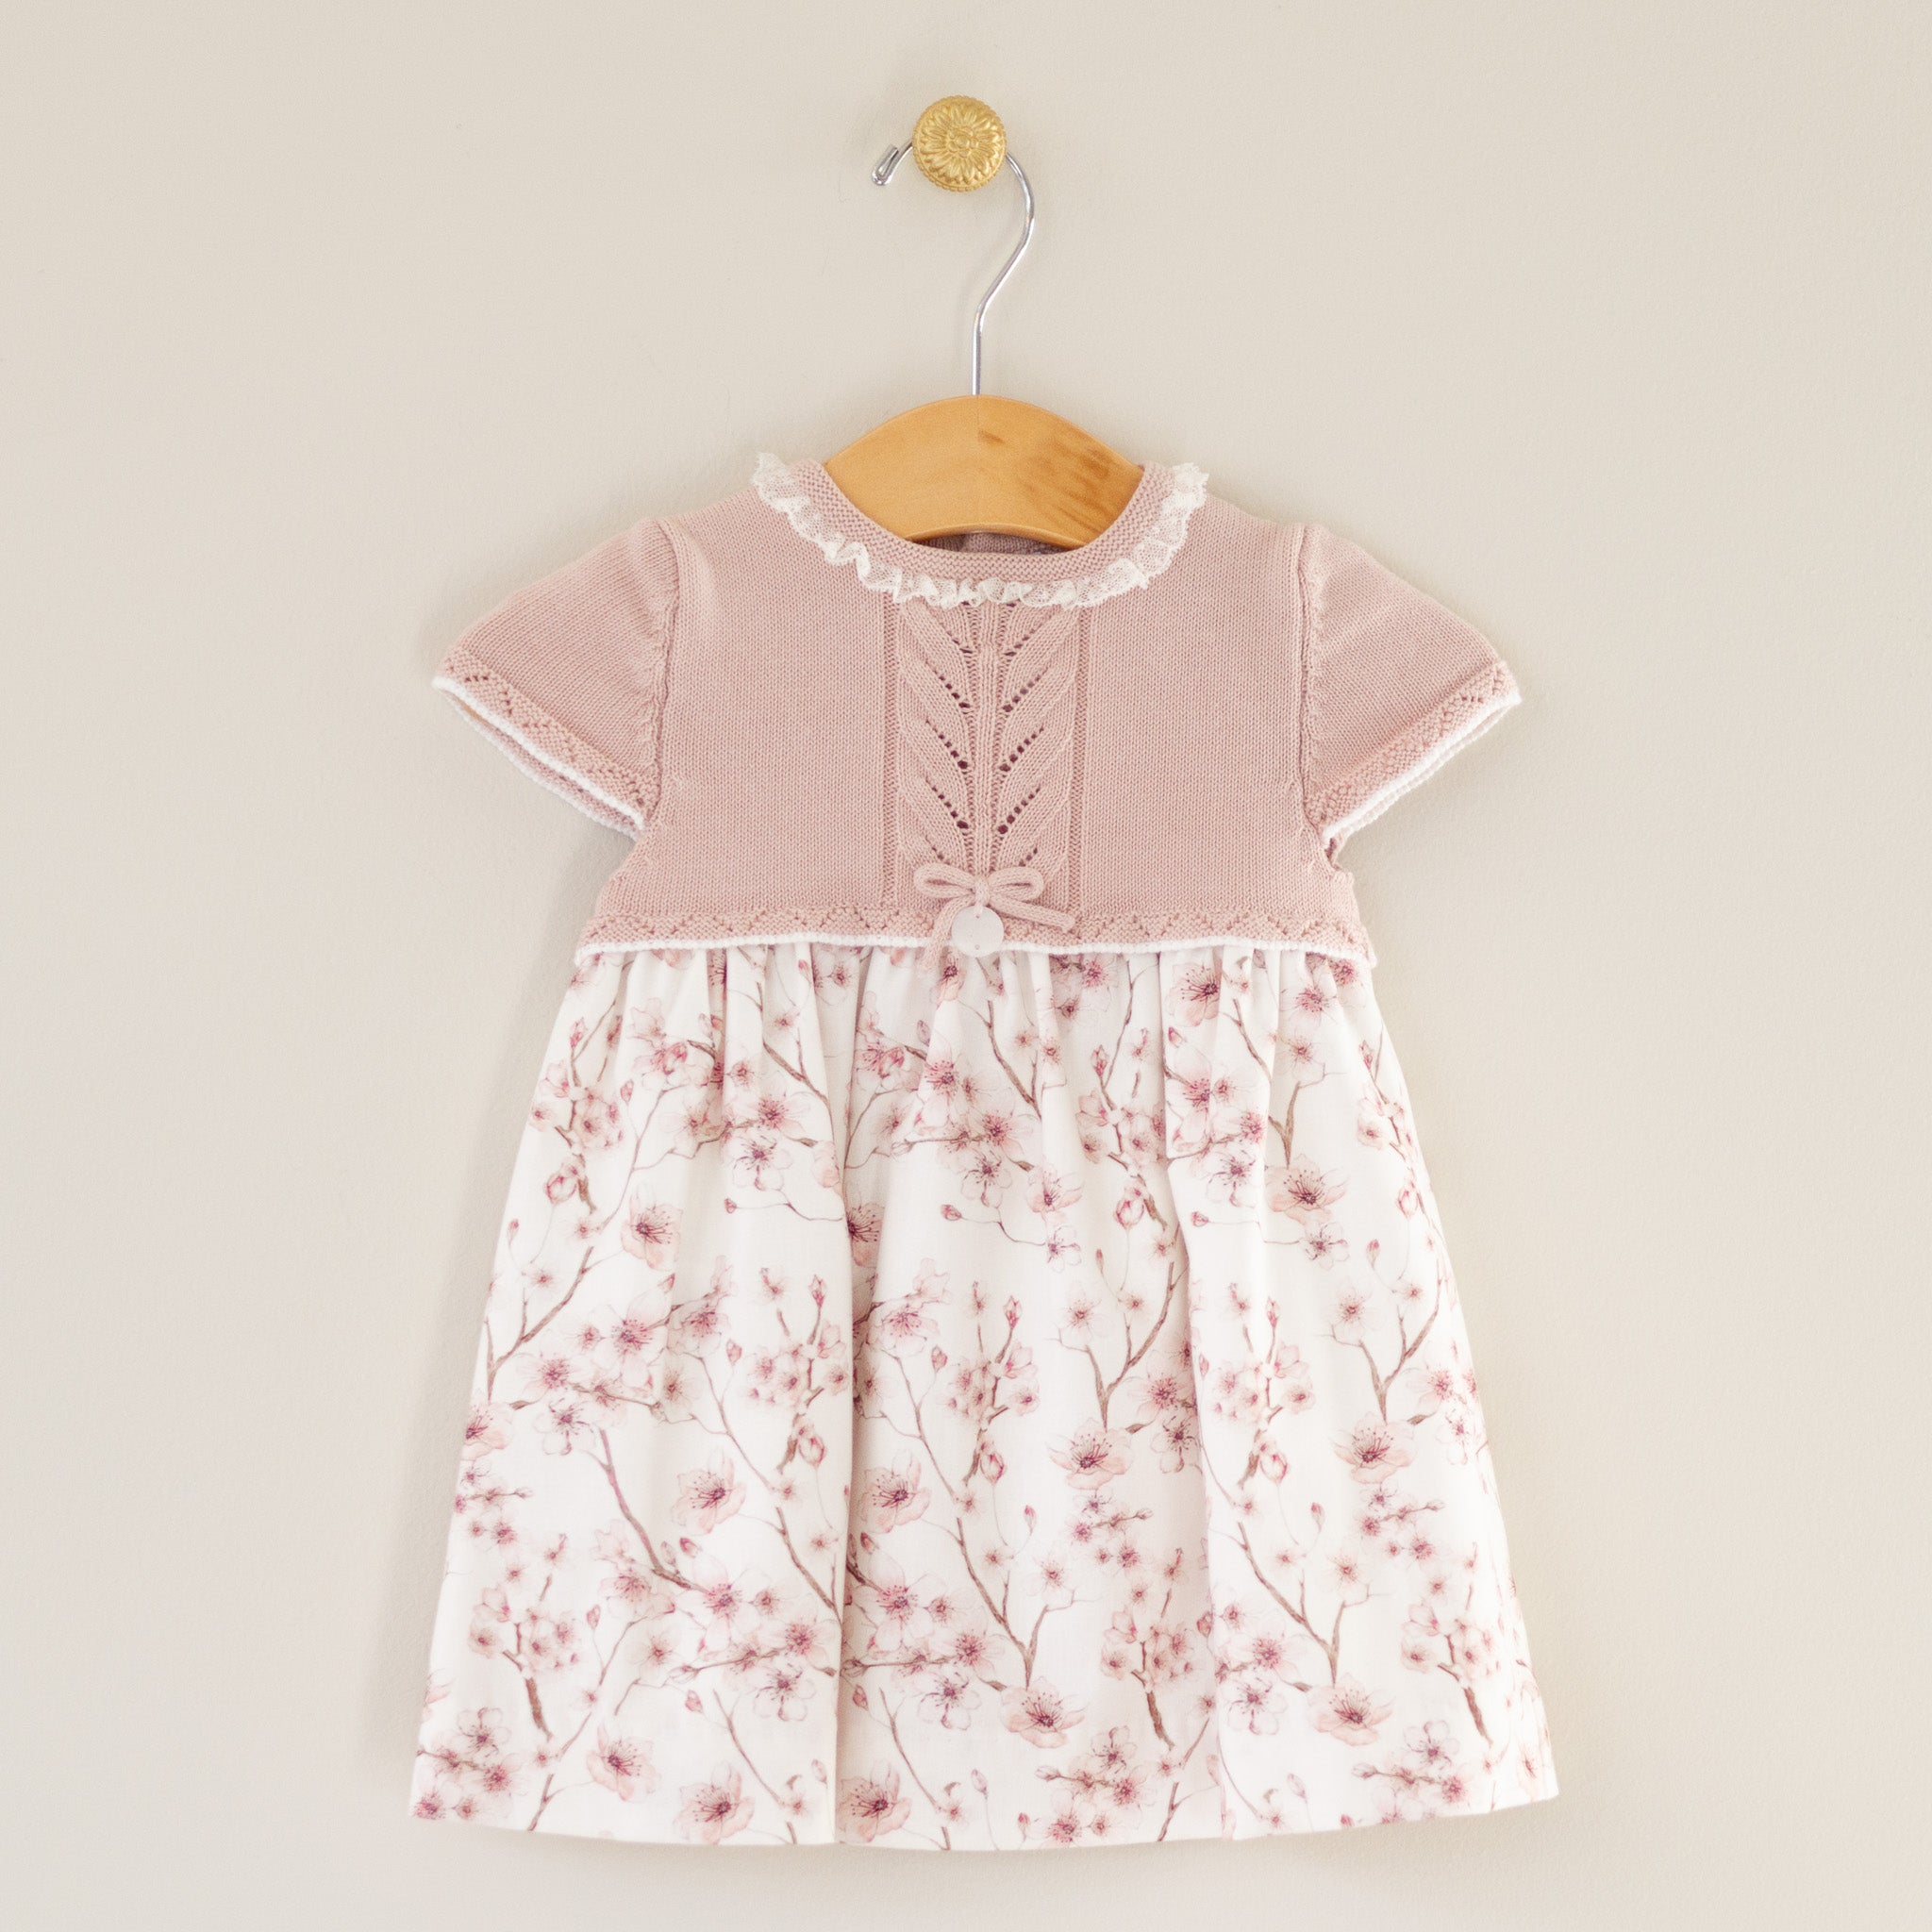 Rose Knit Dress with Cherry Blossom Print